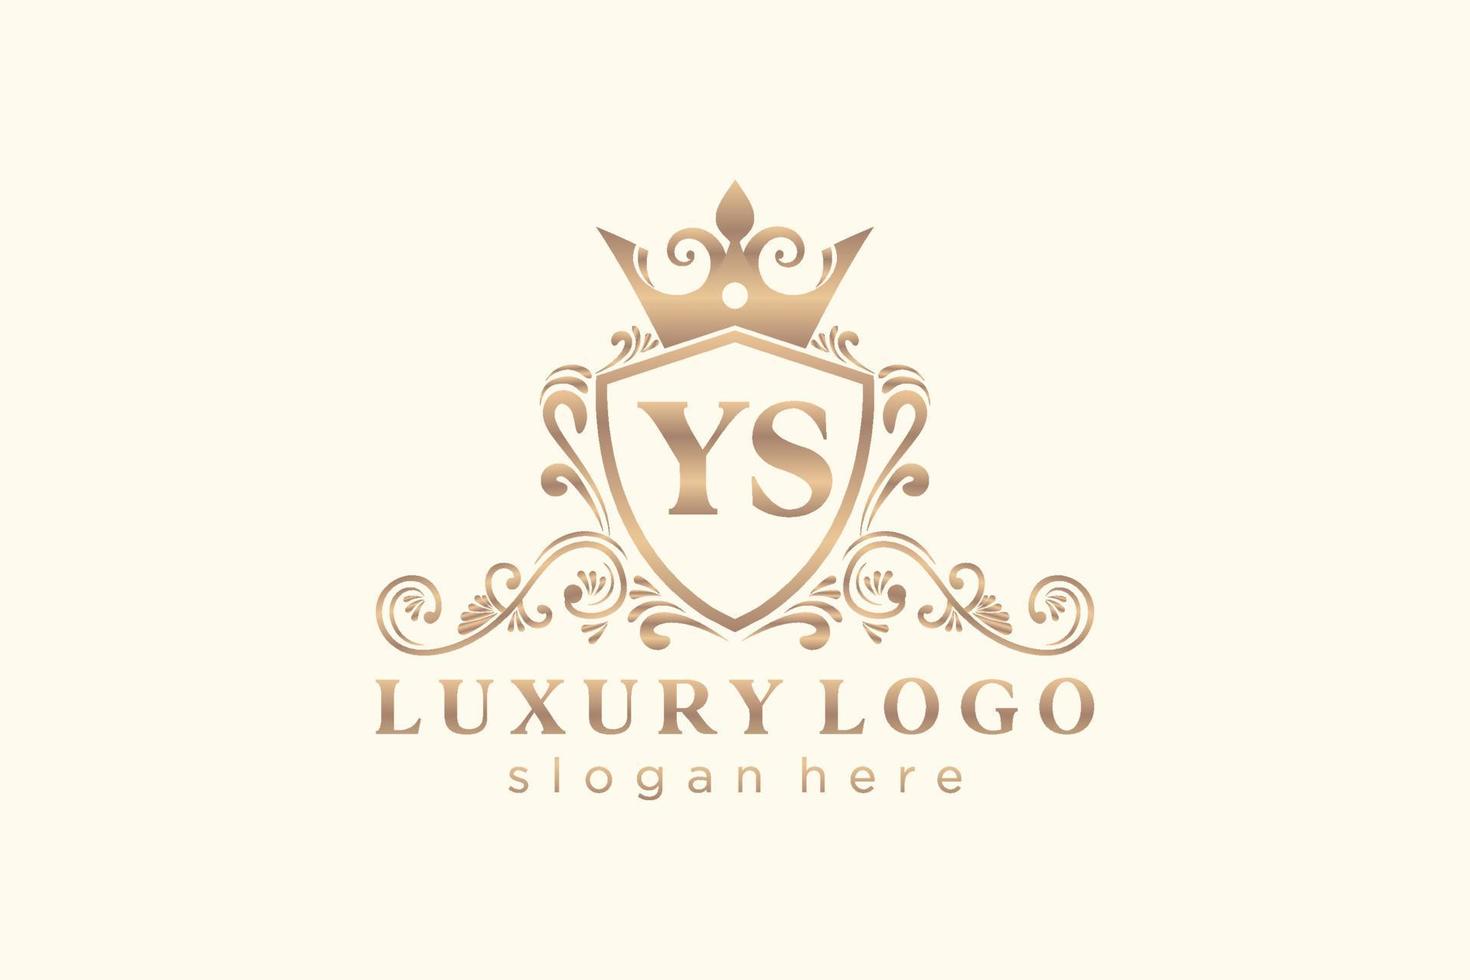 Initial YS Letter Royal Luxury Logo template in vector art for Restaurant, Royalty, Boutique, Cafe, Hotel, Heraldic, Jewelry, Fashion and other vector illustration.